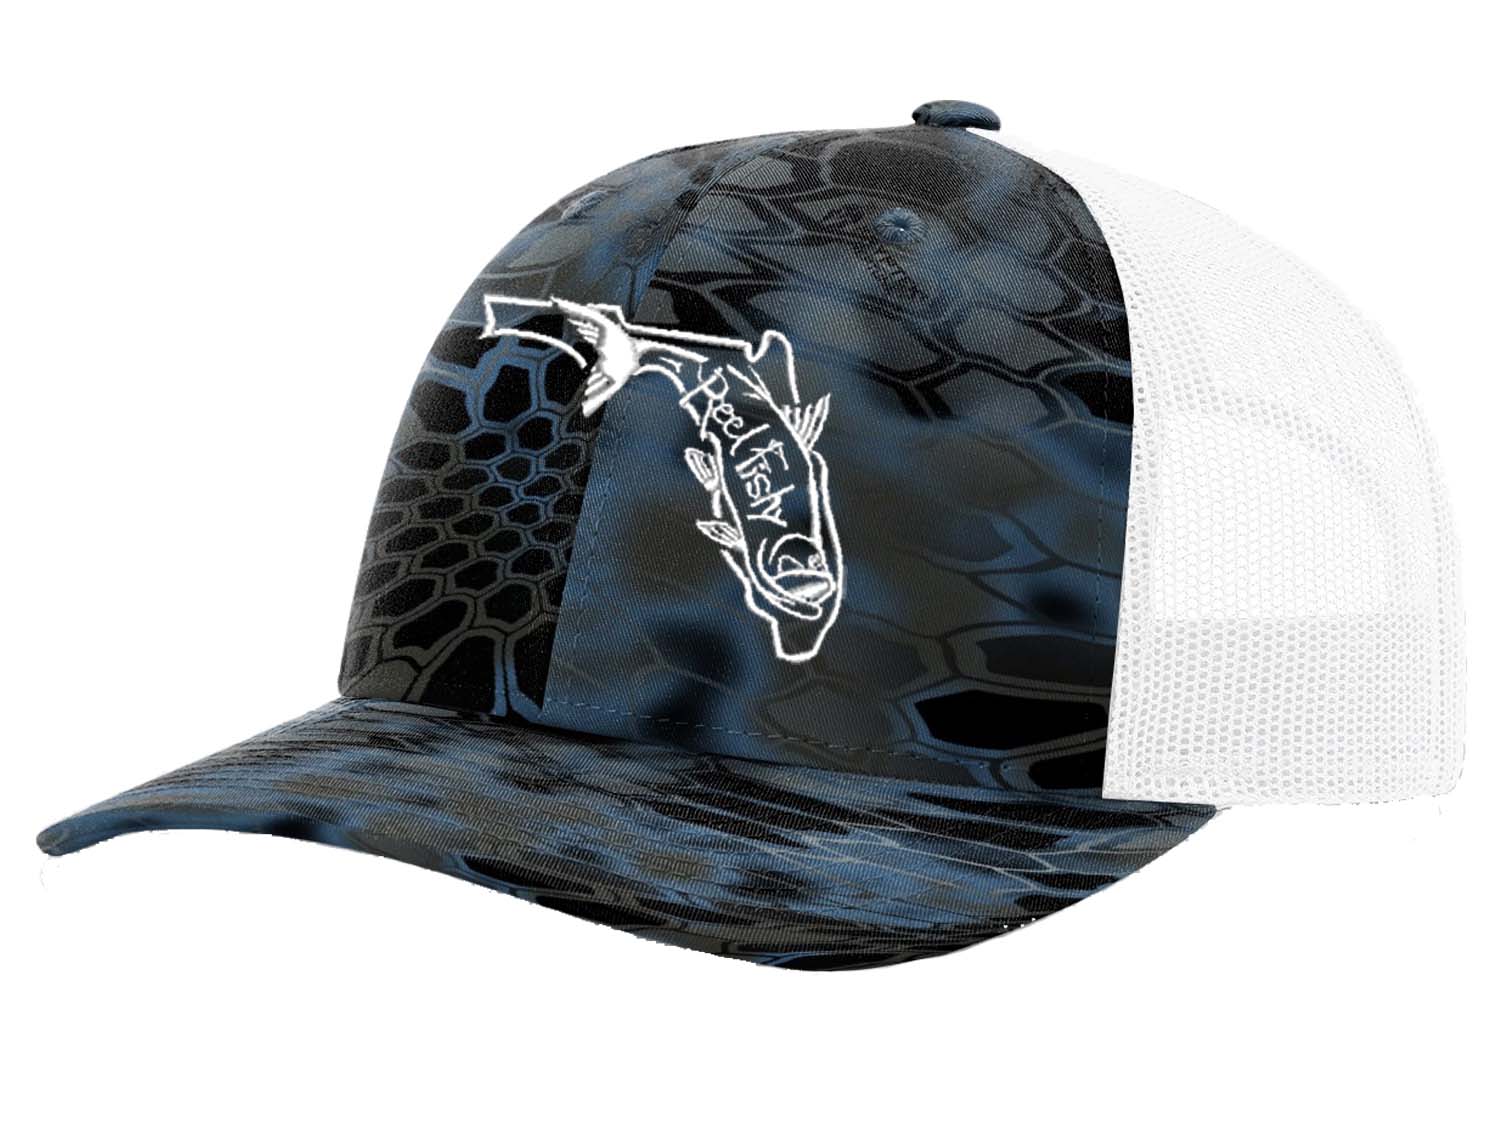 Tarpon Kryptek State of Florida Camo Structured Trucker Hats - 10 Colors! Neptune/White State of fl